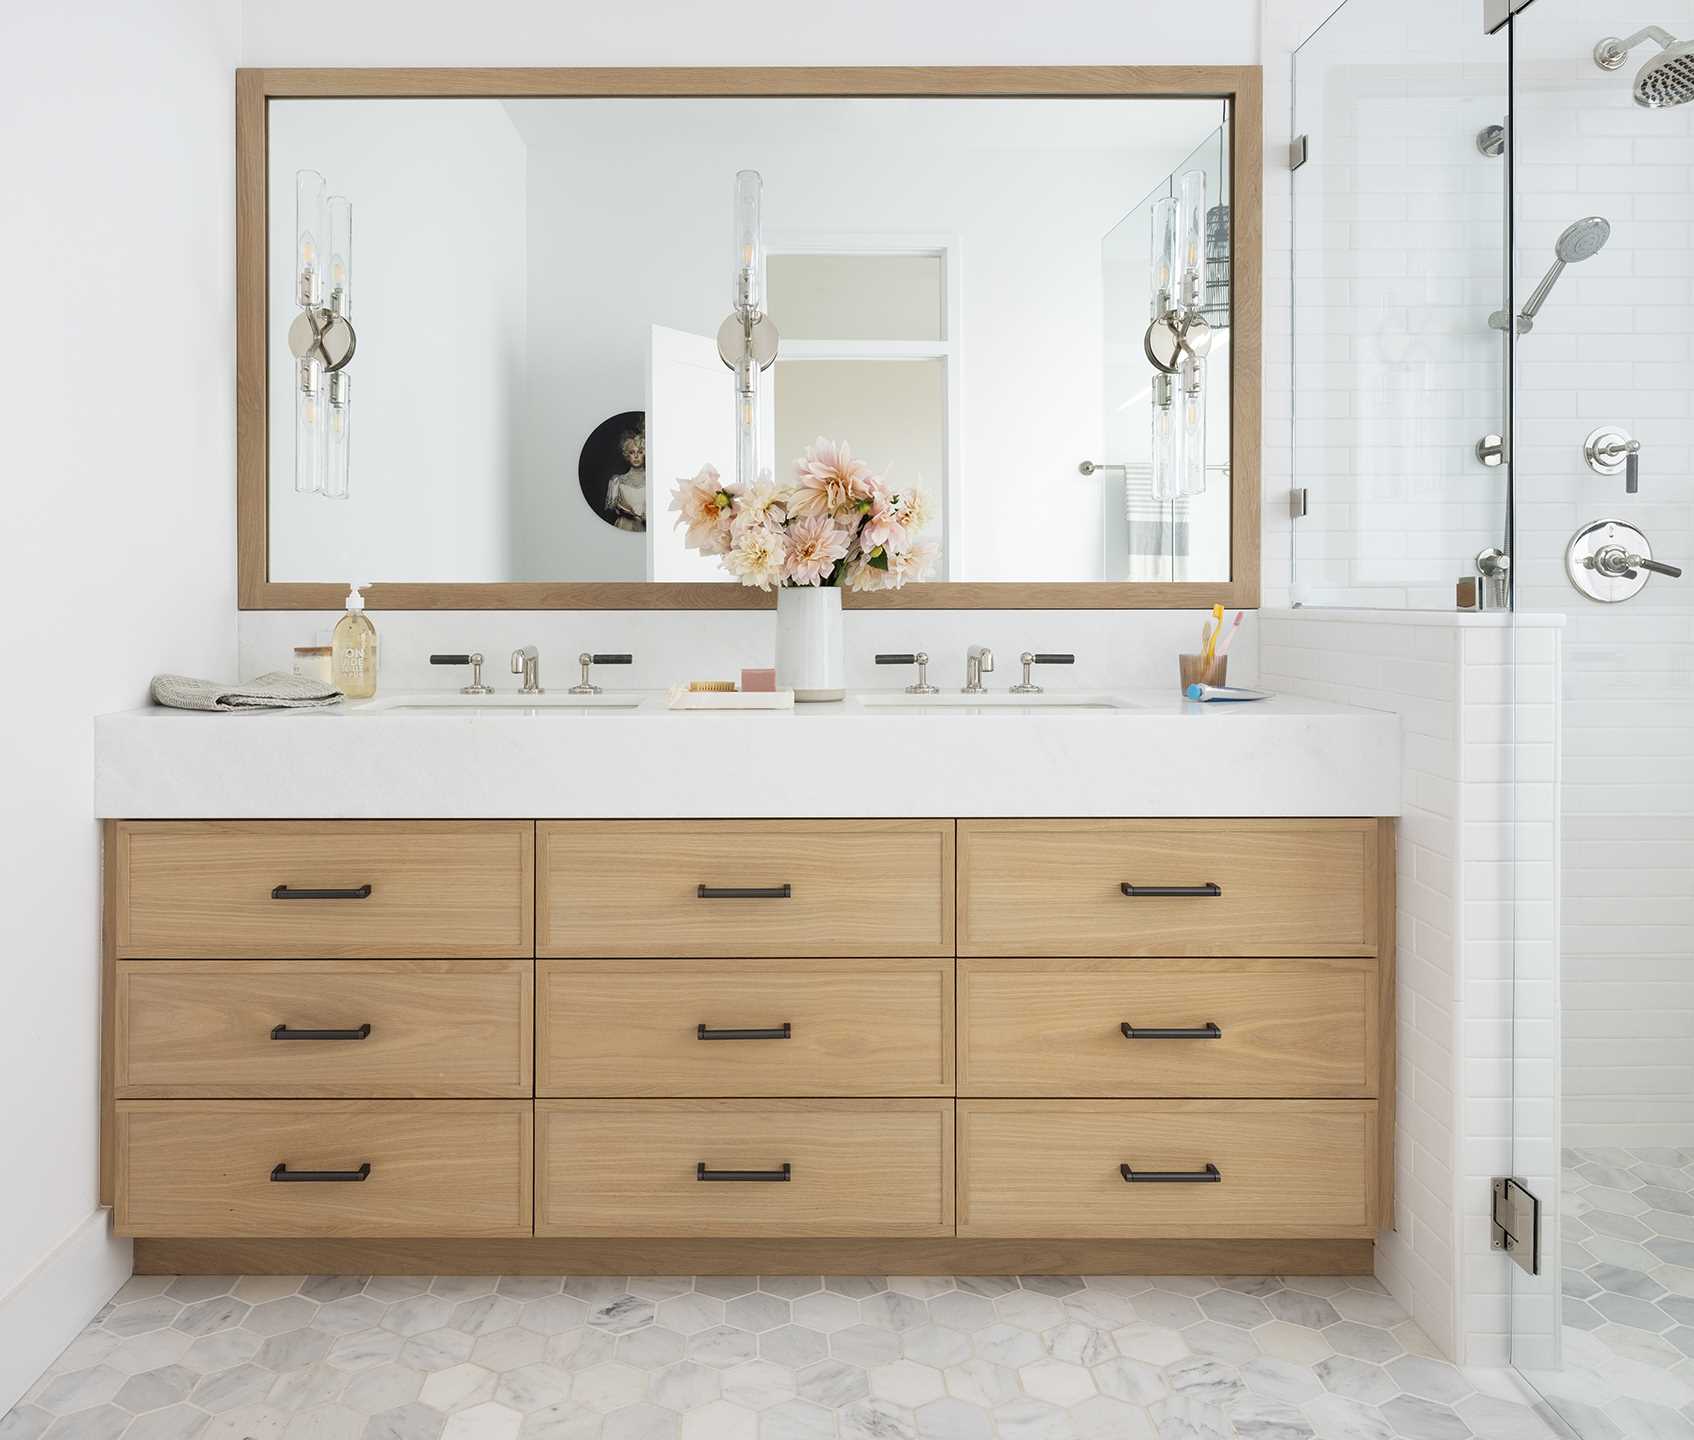 A modern bathroom with a custom-designed wood vanity that fits the ،e perfectly.